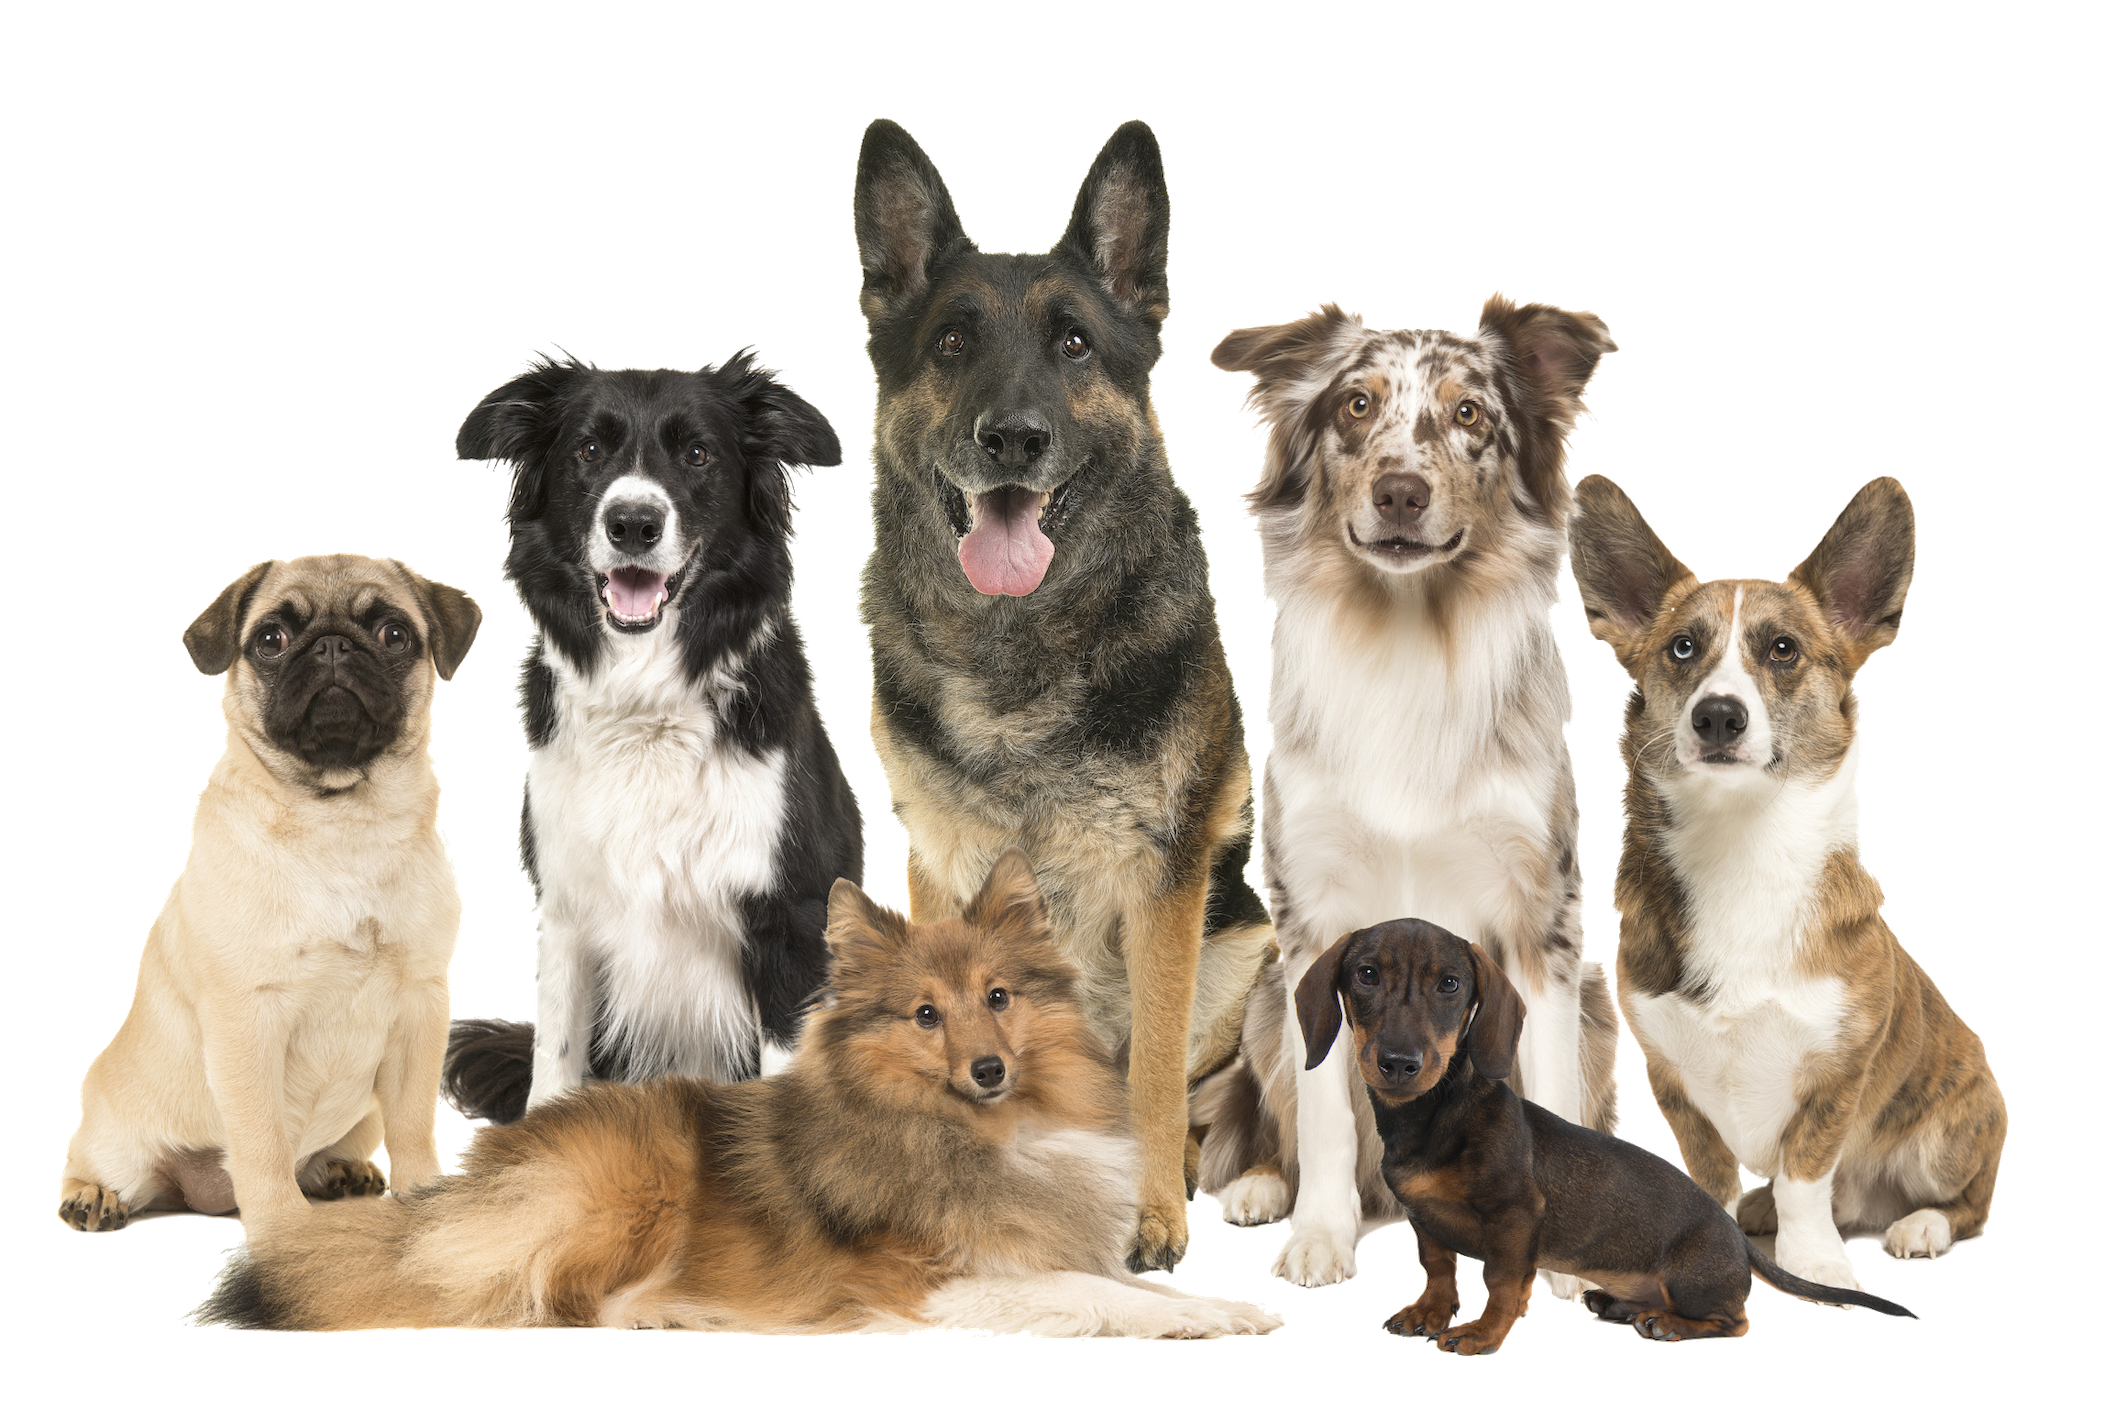 A group of seven different dog breeds sitting and looking attentive and happy.